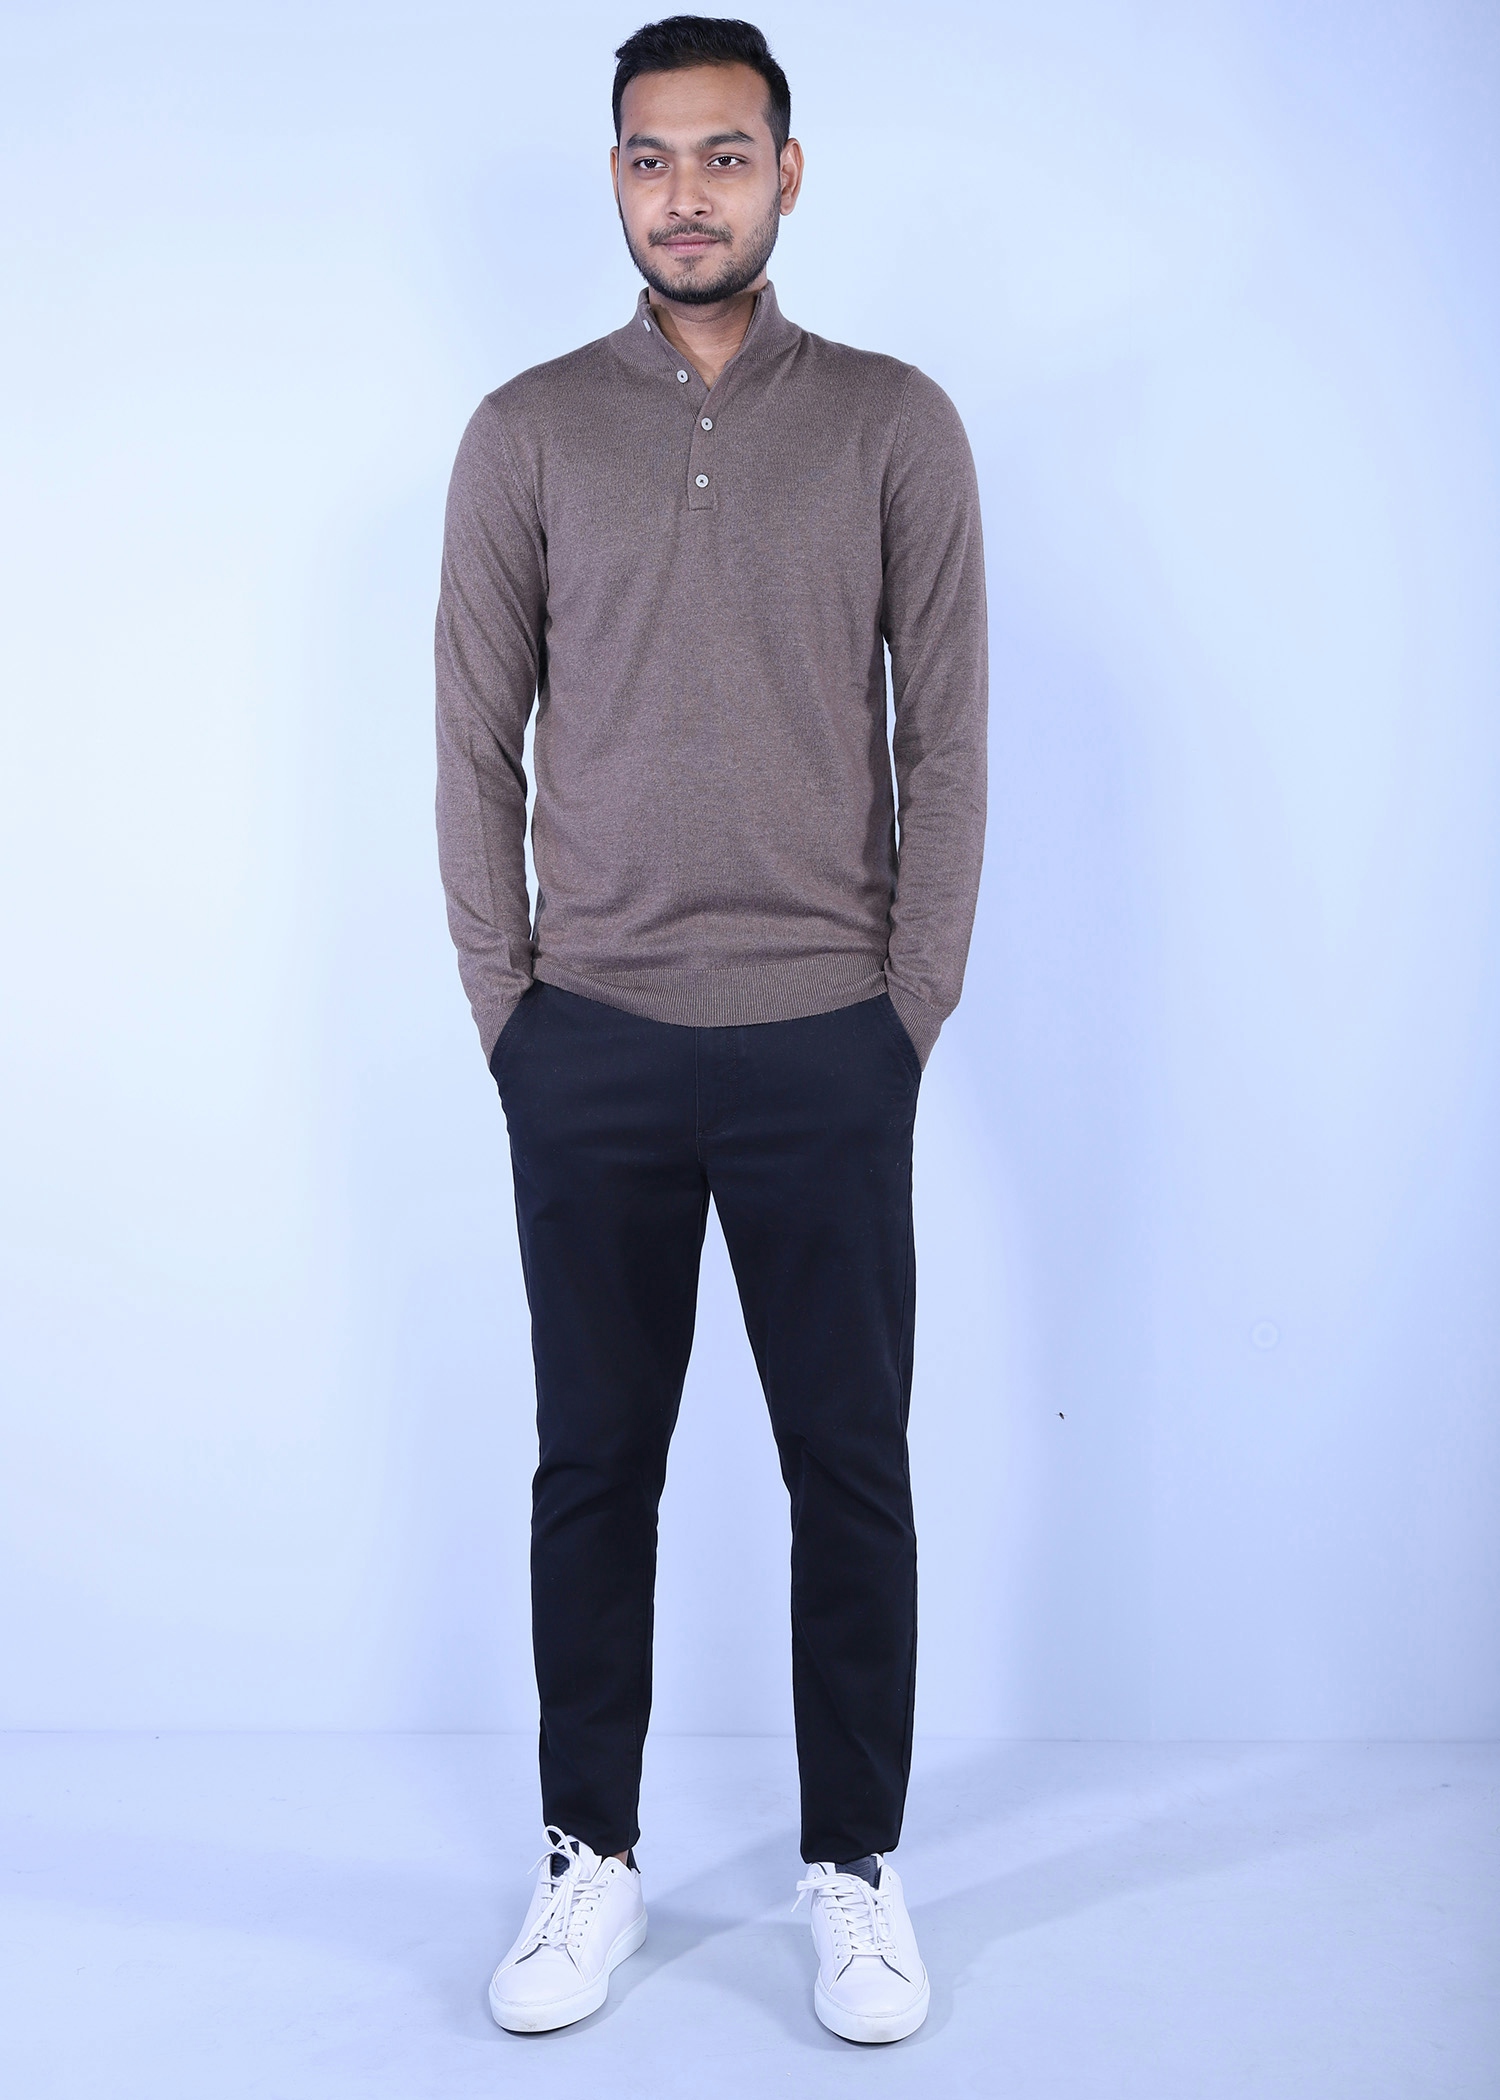 hornero i sweater brown color full front view